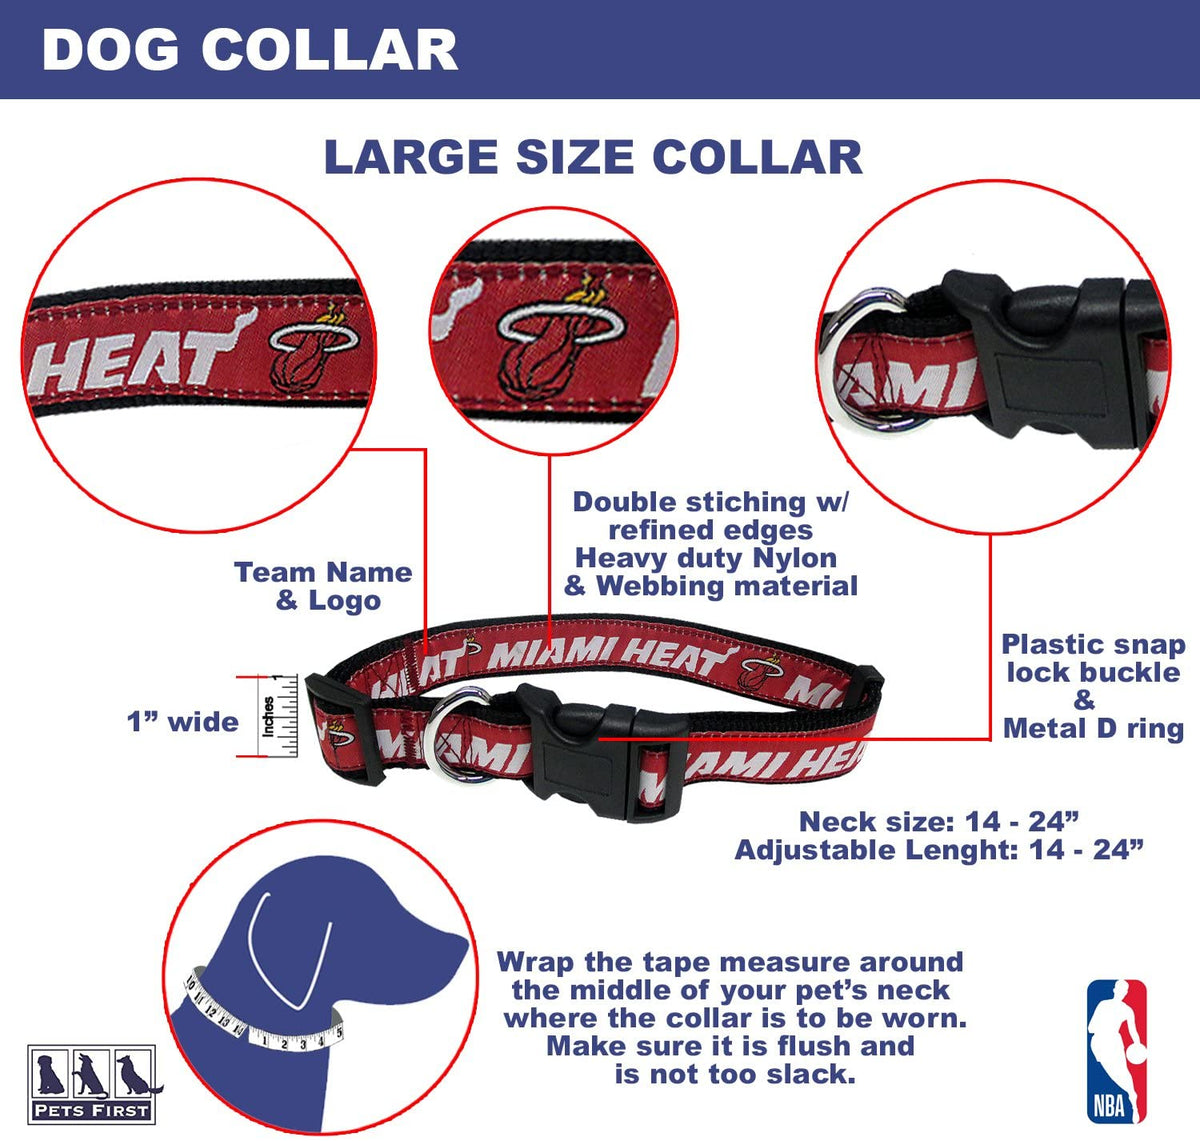 Miami Heat Dog Collar and Leash - 3 Red Rovers